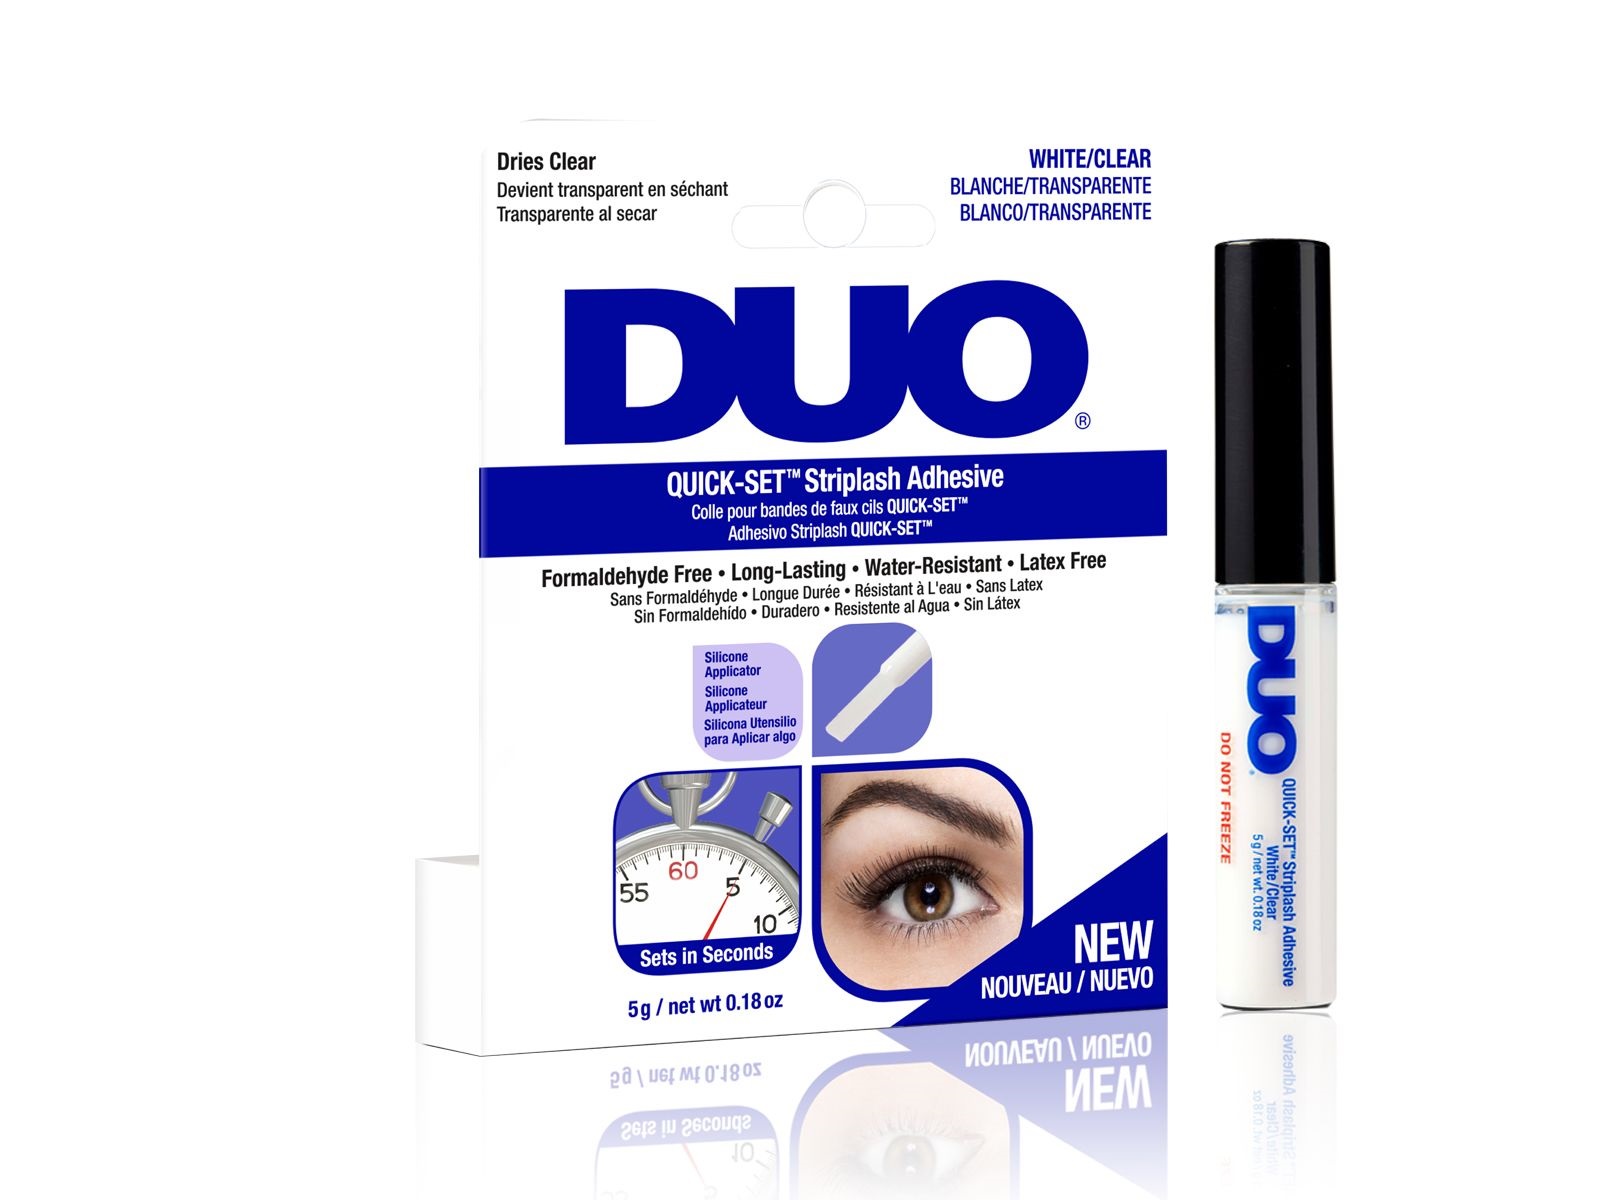 Modsige Inde discolor Ardell DUO Quick-Set Striplash Clear 5 g | lyko.com